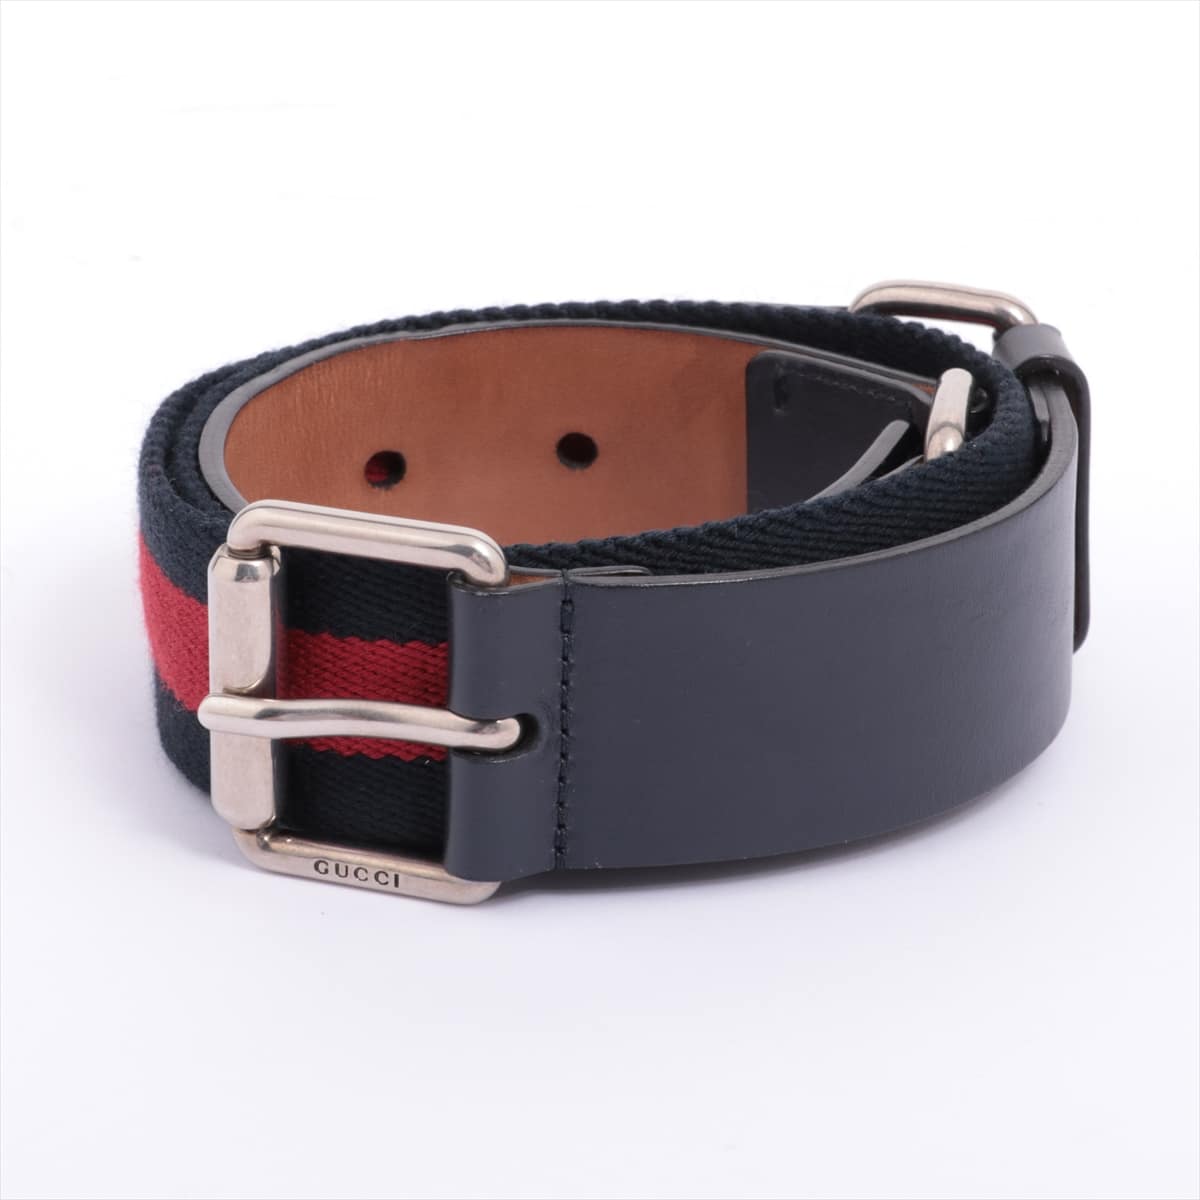 Gucci 322047 Sherry Line Belt Canvas & leather Navy x red